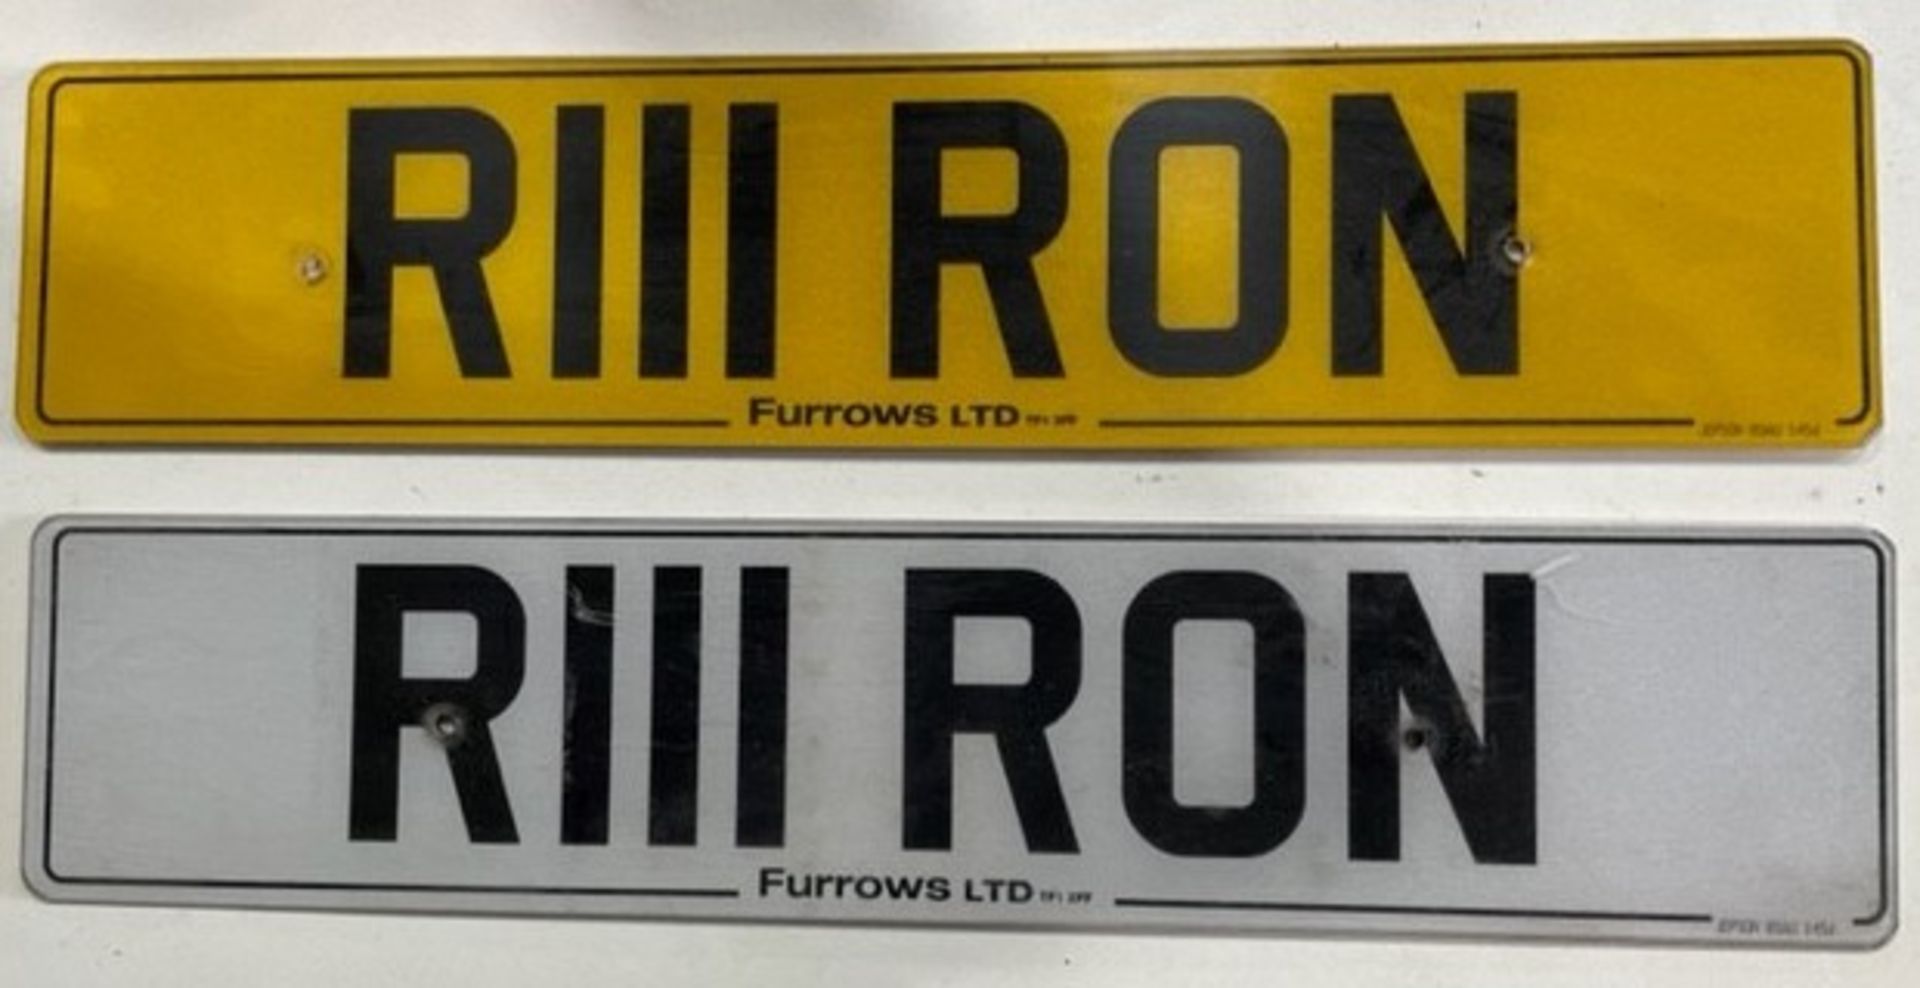 Cherished Registration Plate ‘’R111 RON’’ on Retention Certificate (Location: Stockport. Please